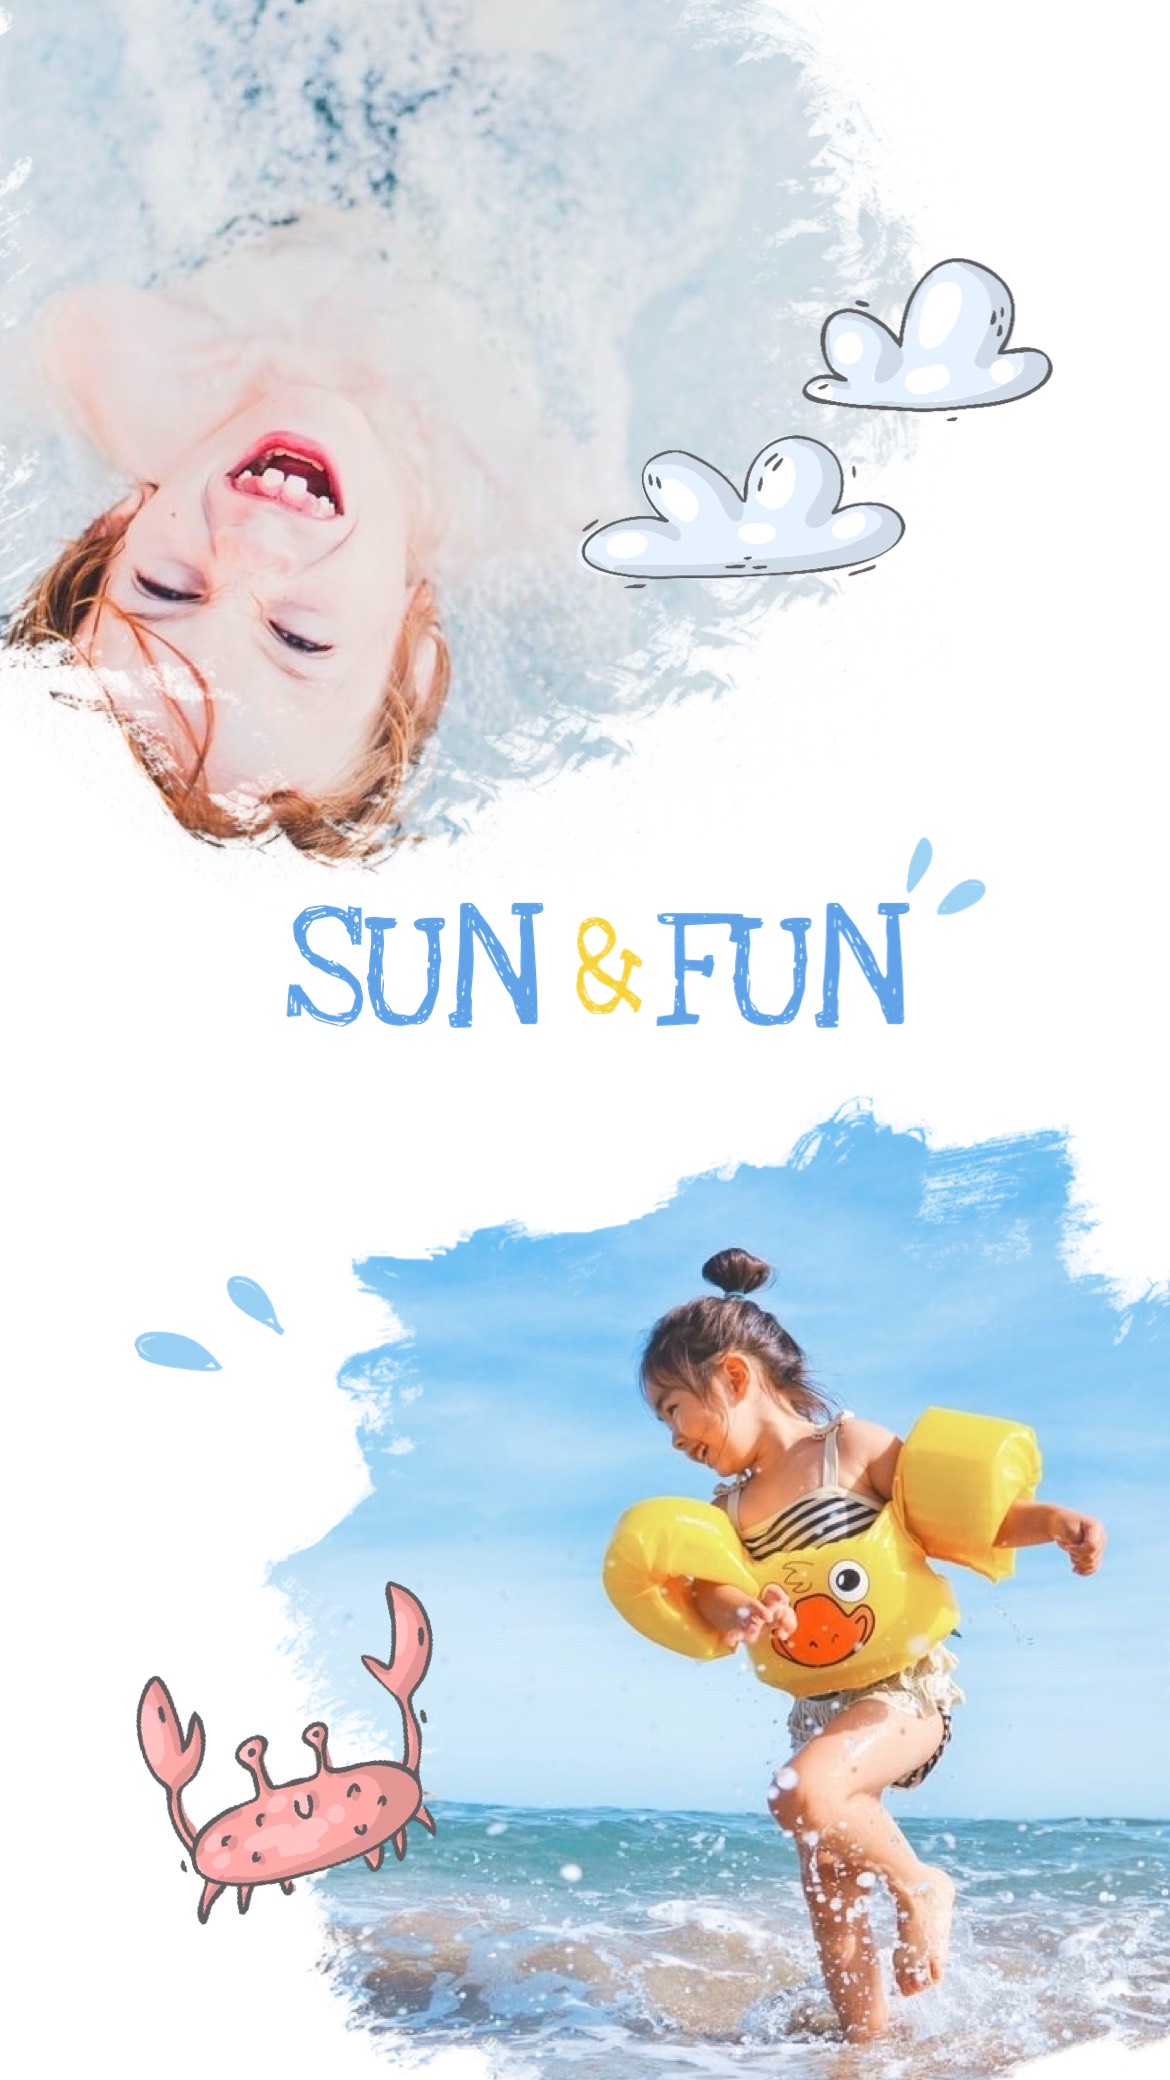 Kids at the beach fun in the sun summer story template